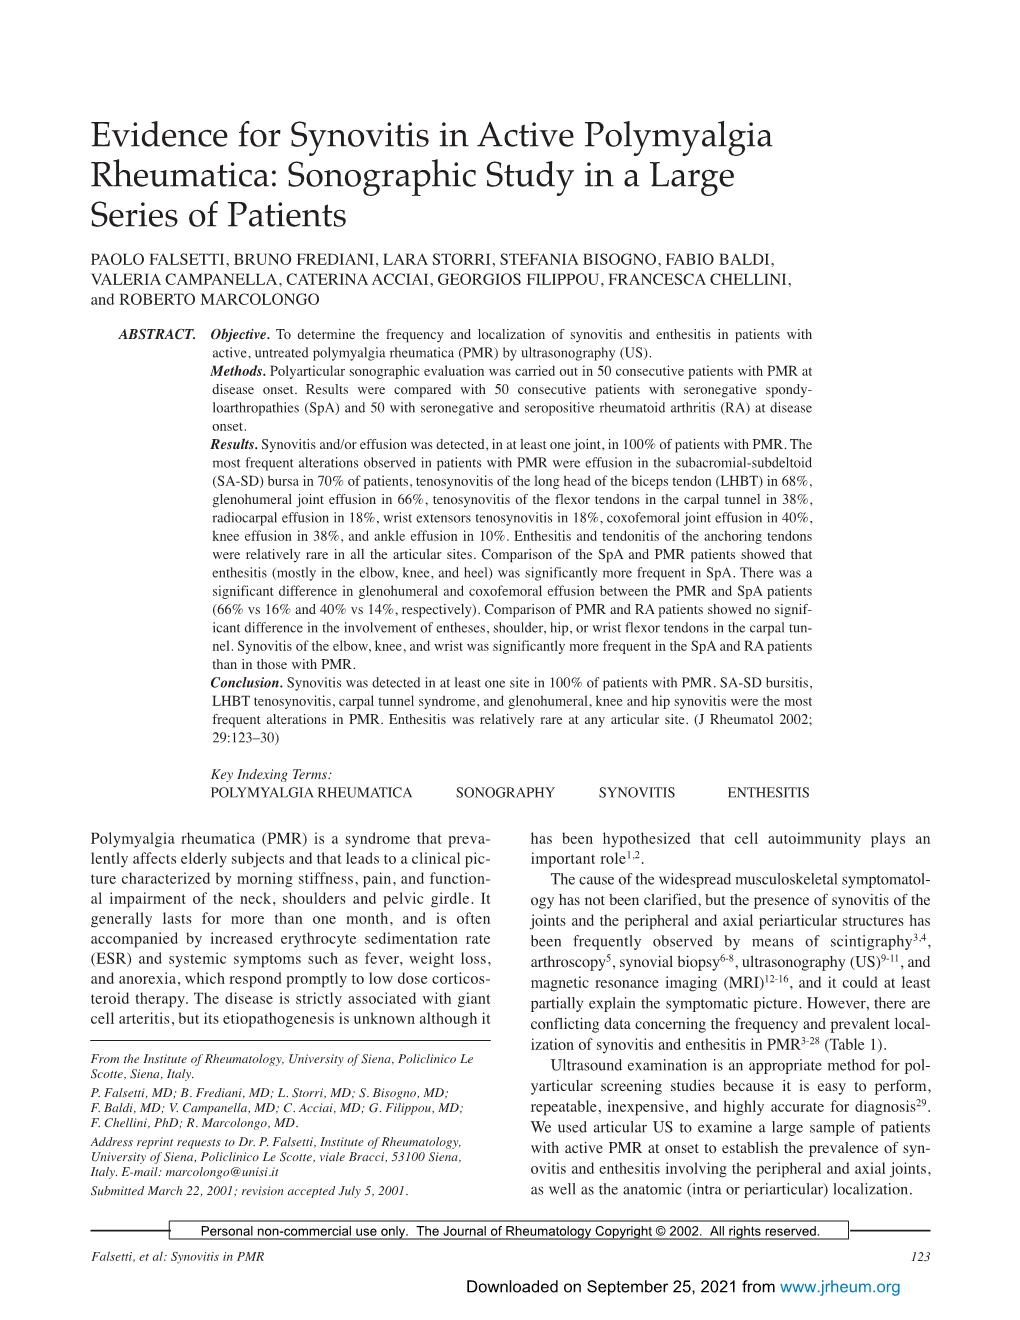 Evidence for Synovitis in Active Polymyalgia Rheumatica: Sonographic Study in a Large Series of Patients